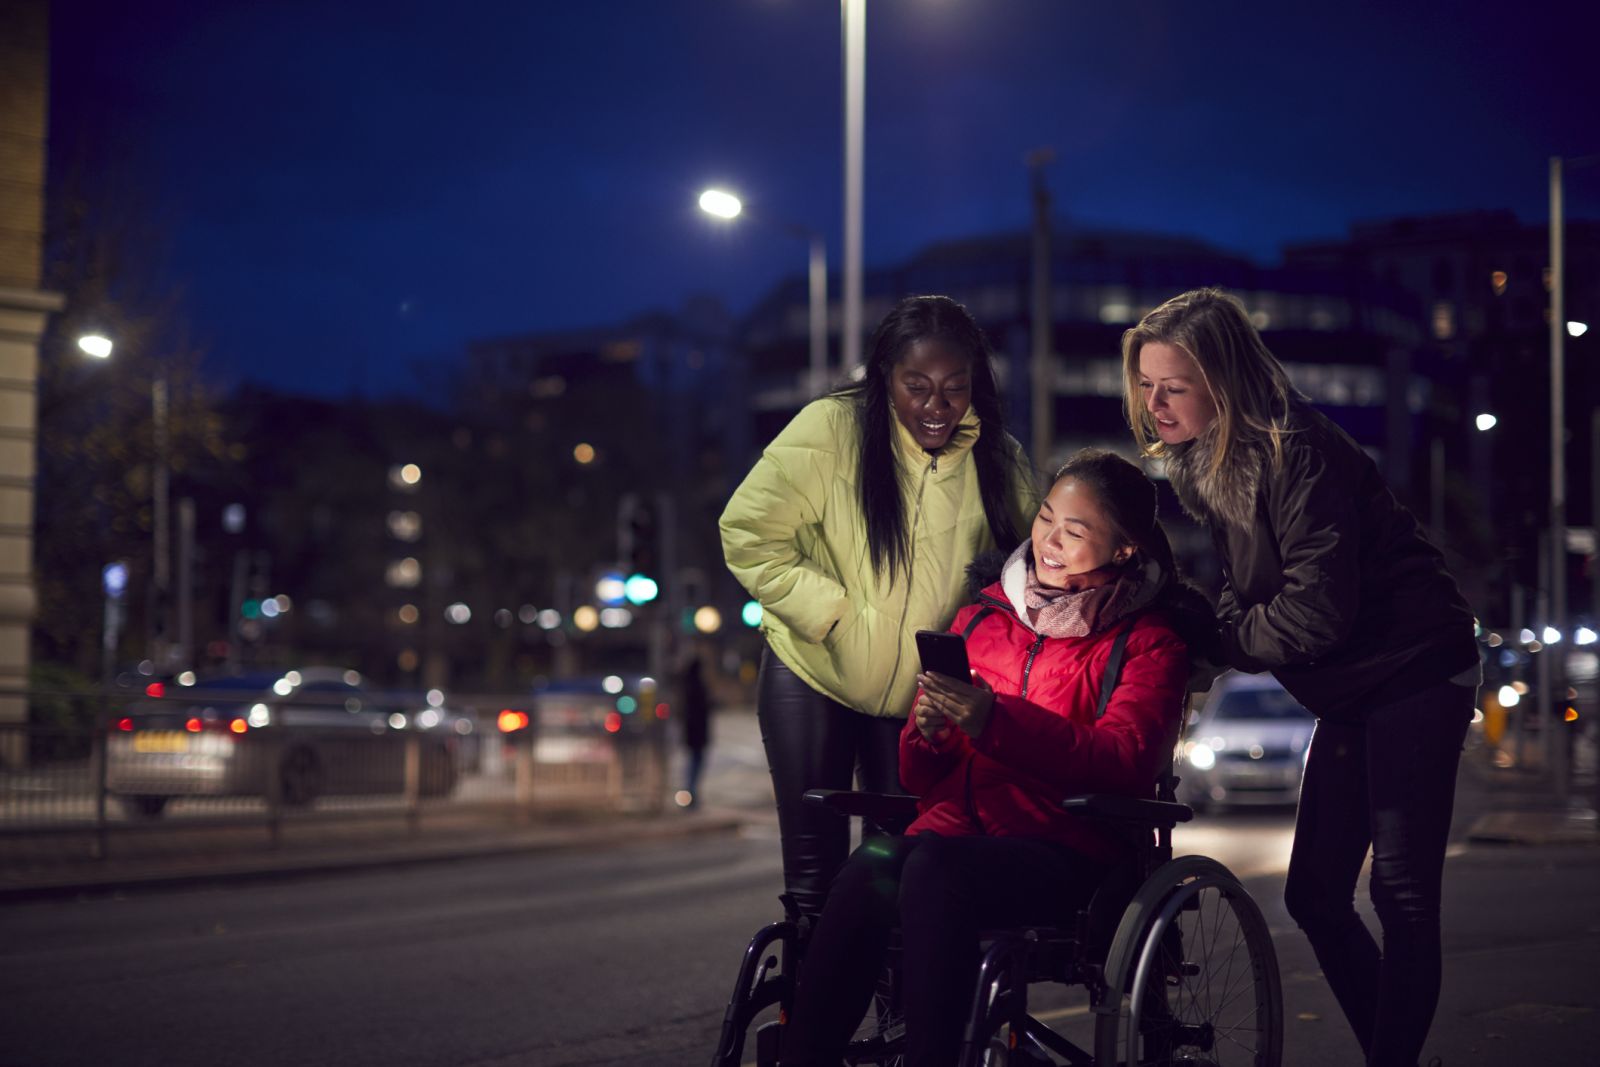 A young woman in a wheelchair talking to two friends at night in the city banner image